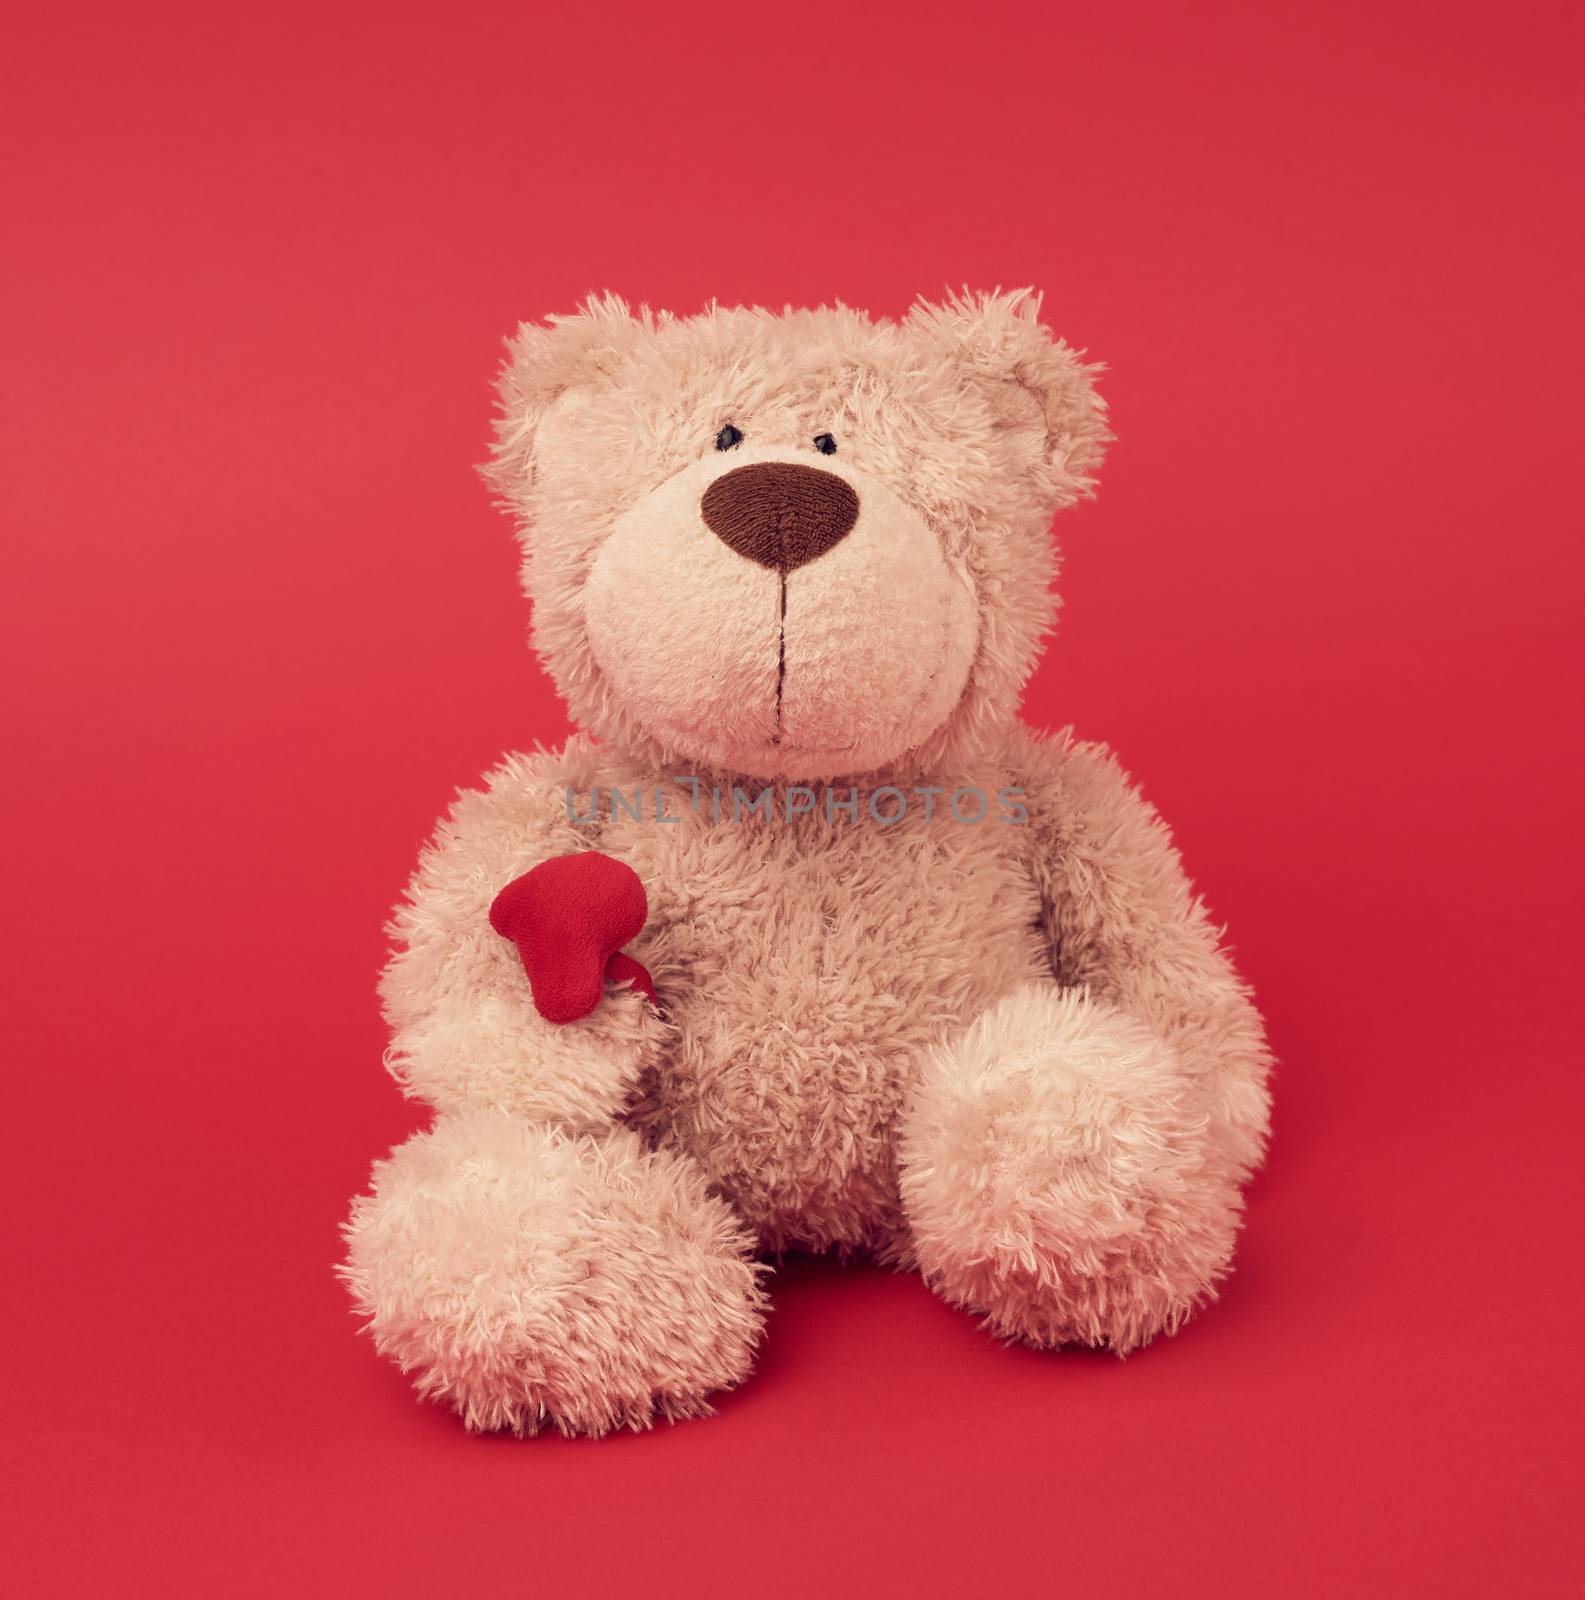  little brown teddy bear, toy is sitting on a red background, close up